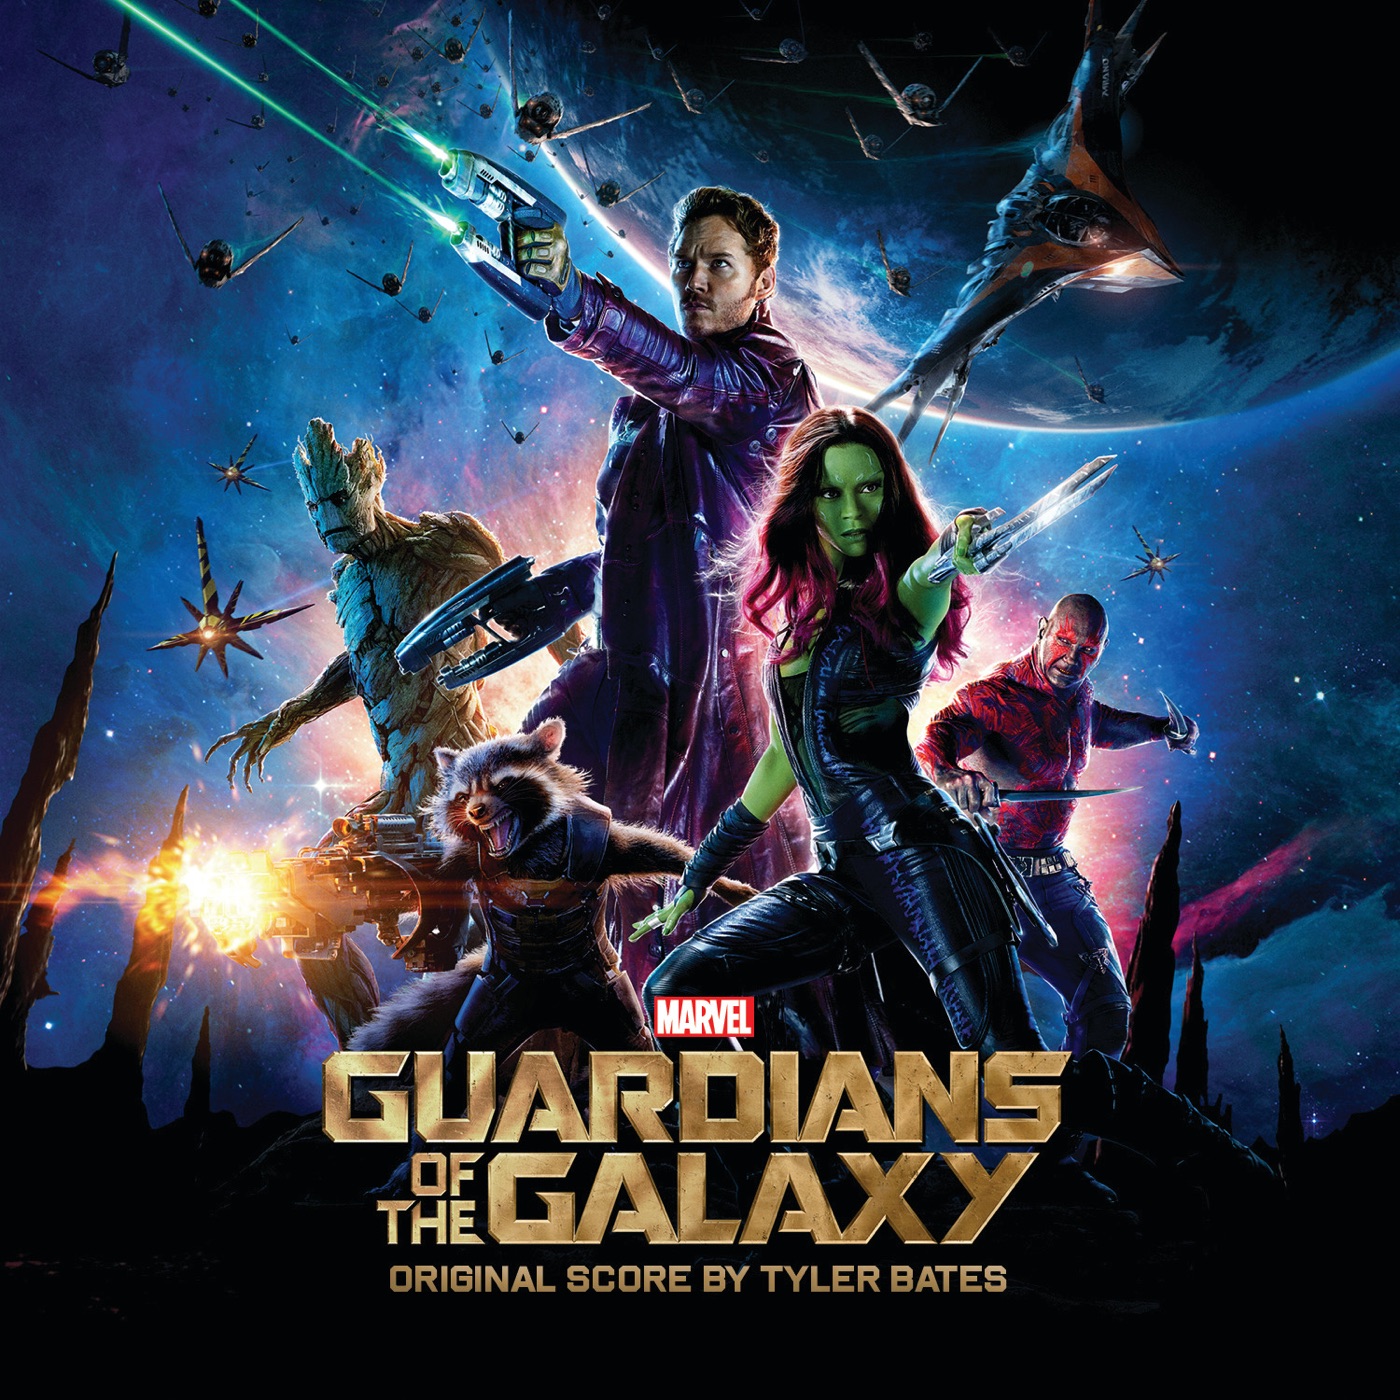 Guardians of the Galaxy (Original Score) by Tyler Bates